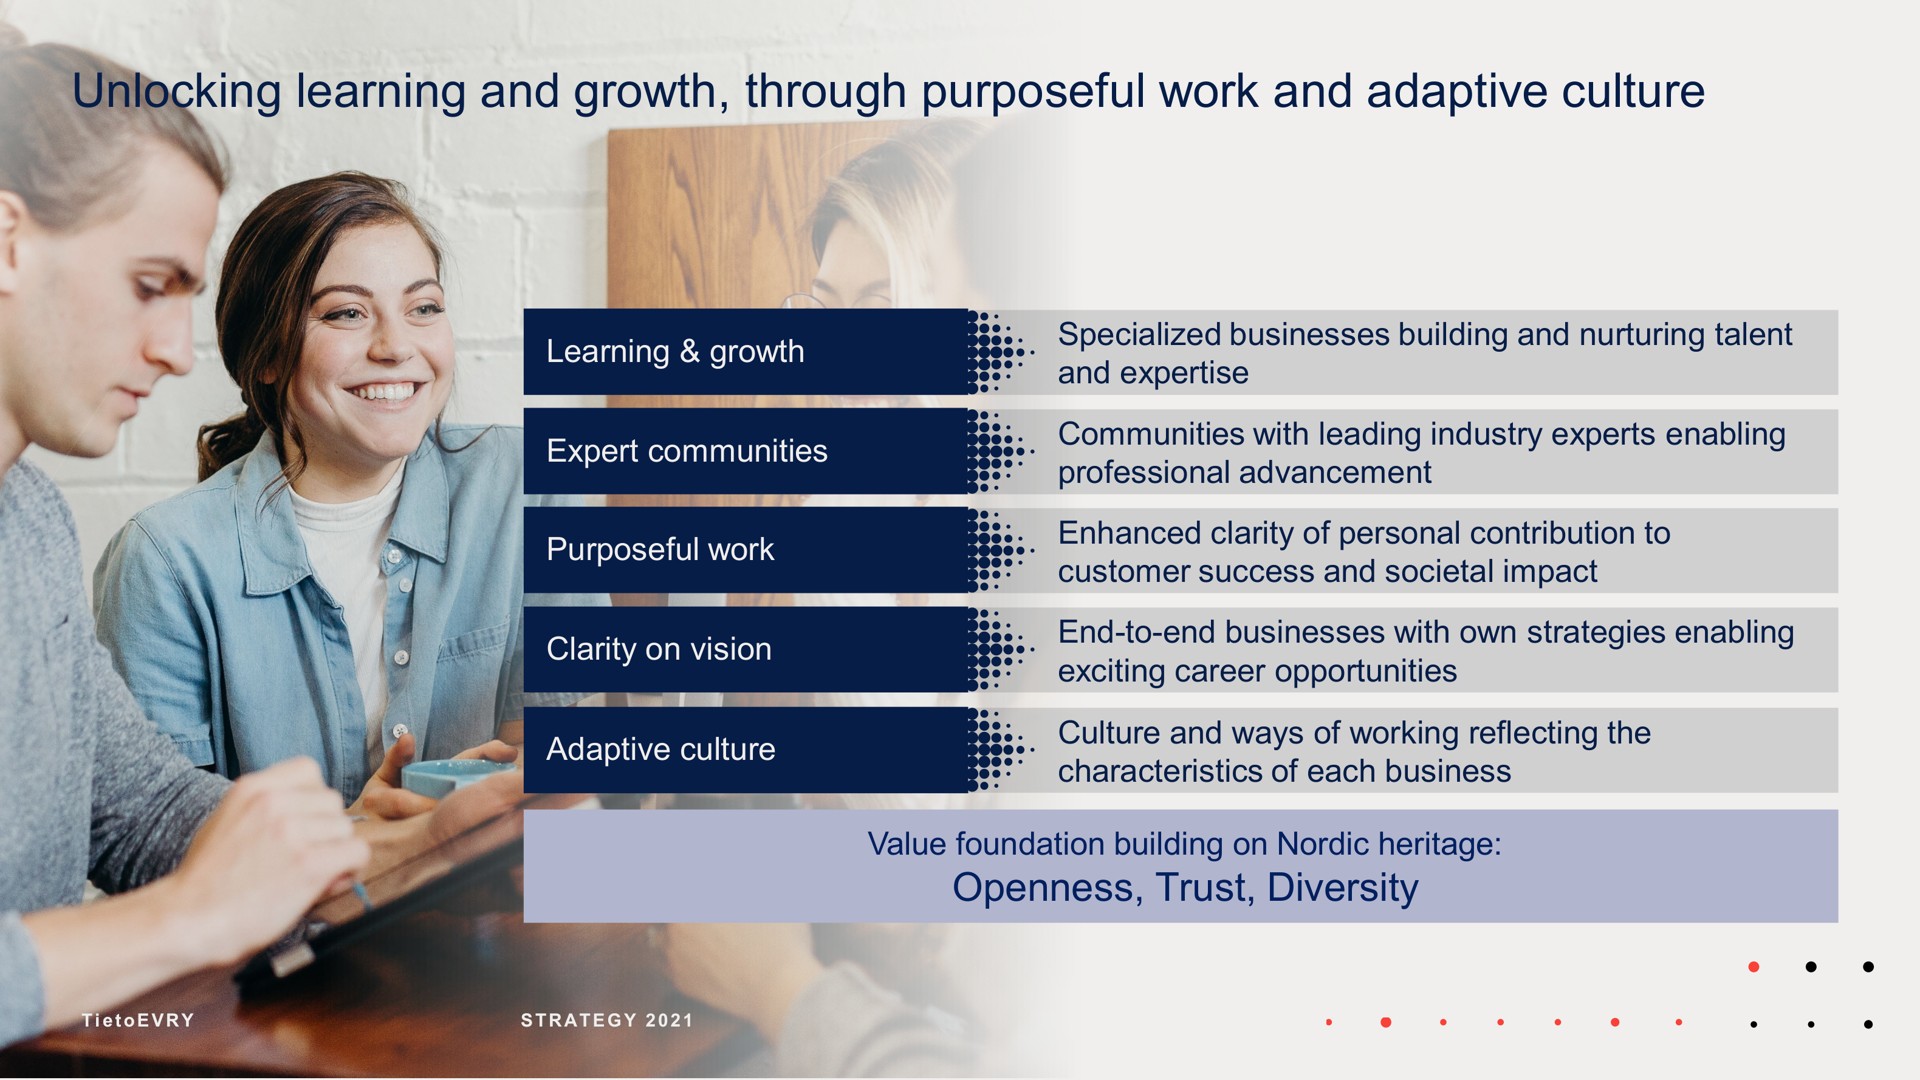 unlocking learning and growth through purposeful work and adaptive culture | Tietoevry